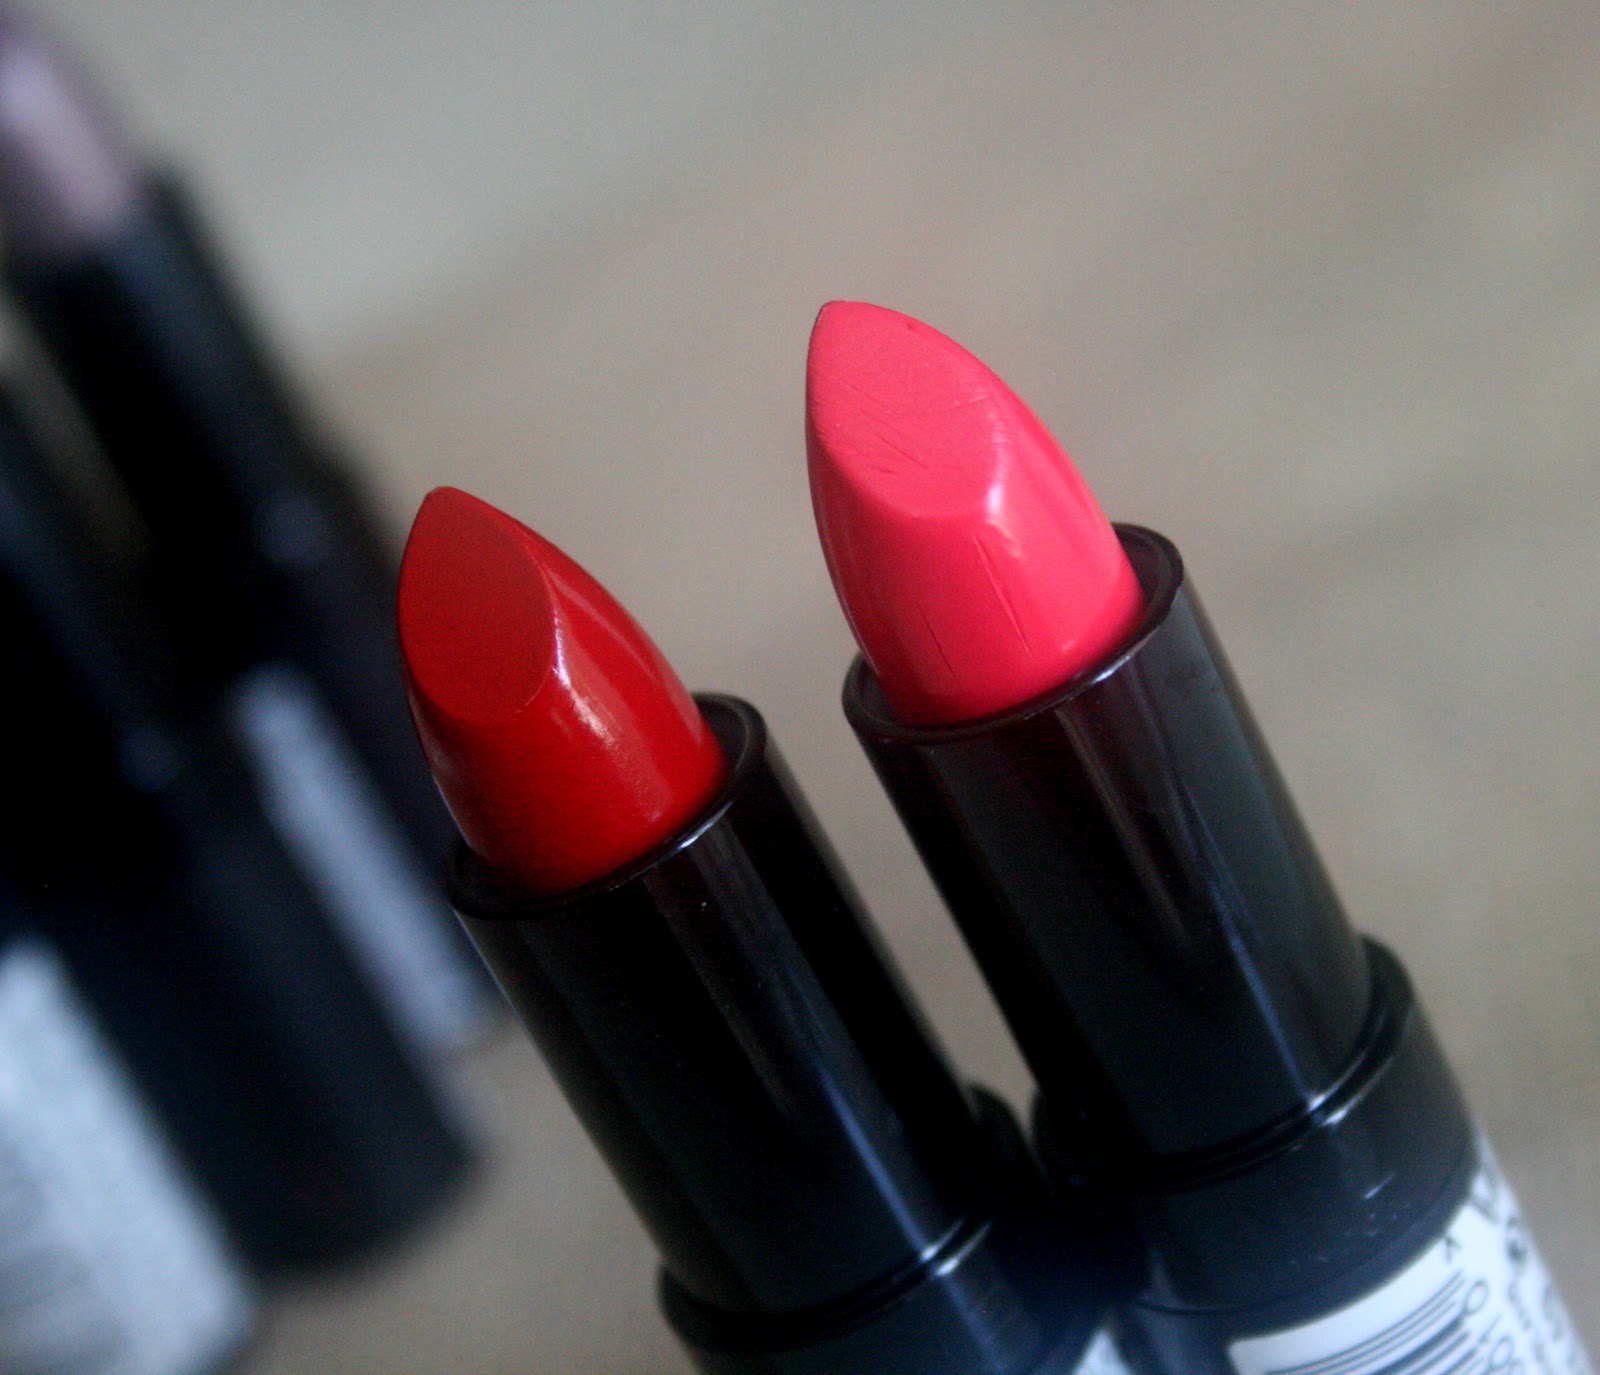 Transform Your Lip Color With The Rimmel Lasting Finish Lipstick by Kate Mo...